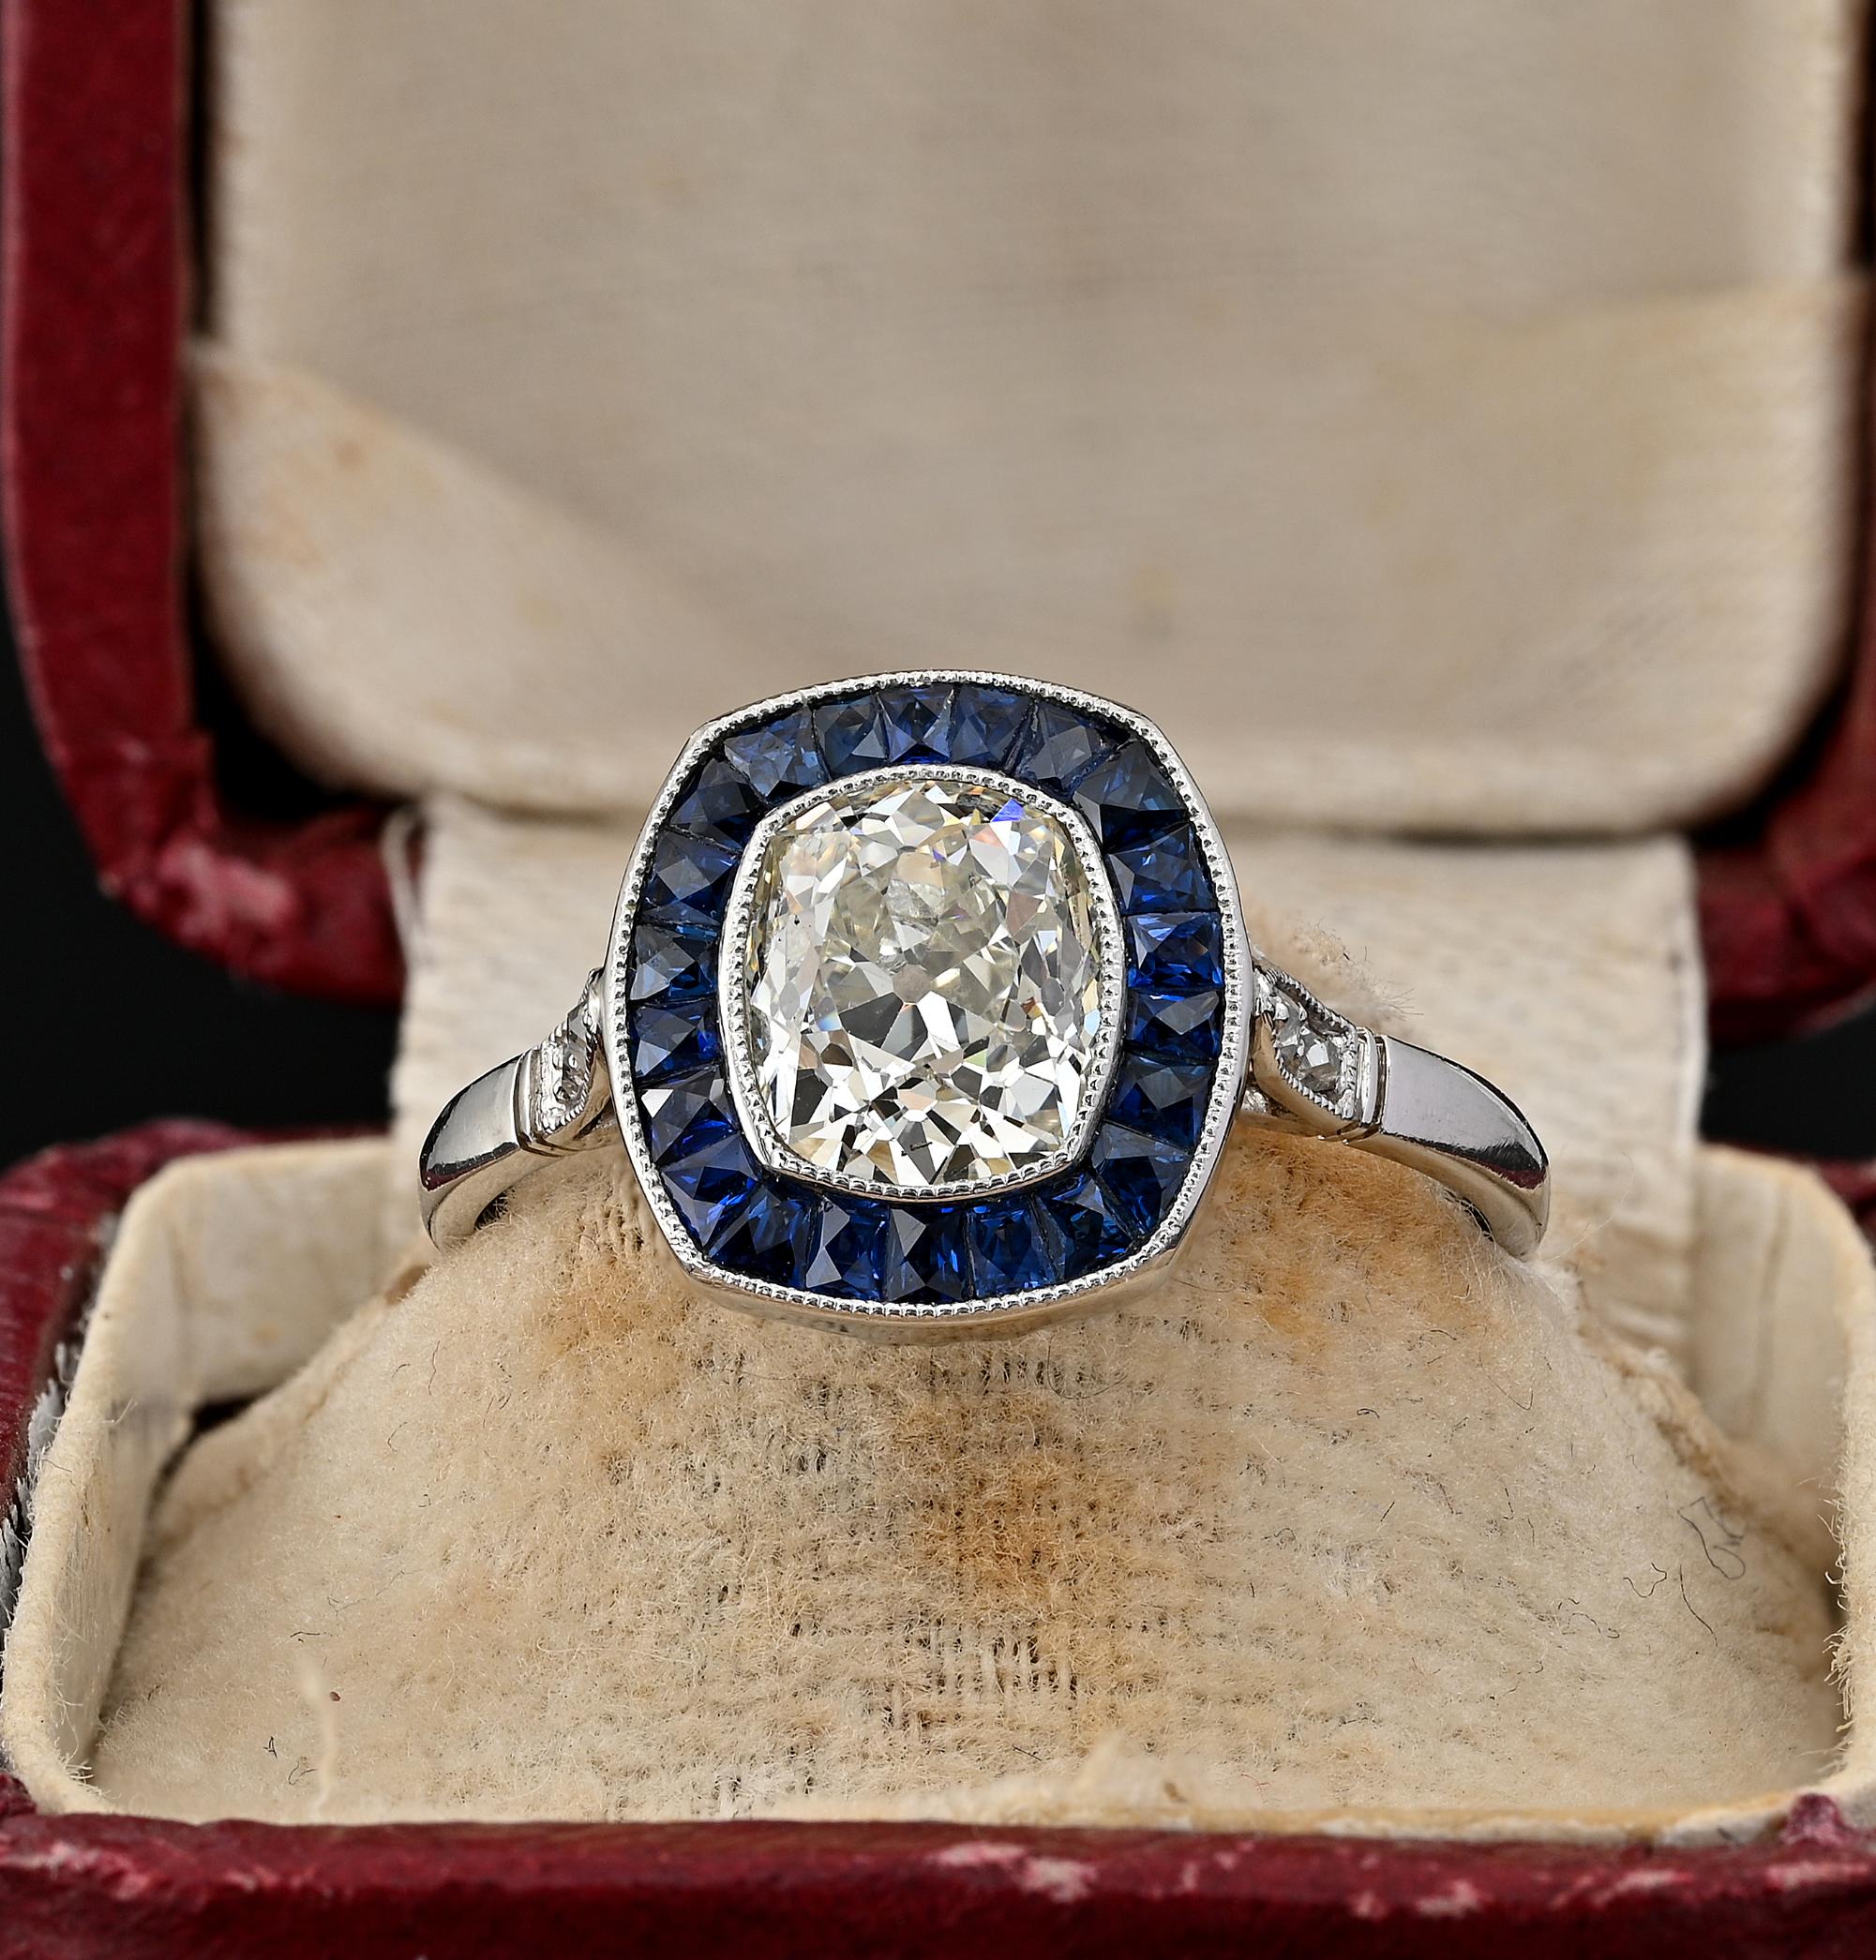 An estate Diamond and sapphire engagement ring featuring a 2.10 Ct  antique cushion cut – old mine cut Diamond-  I/J colour VVS clarity, littler old mine cut Diamonds chasing the shoulders adding . 08 Ct. Diamond is surrounded by a halo of French